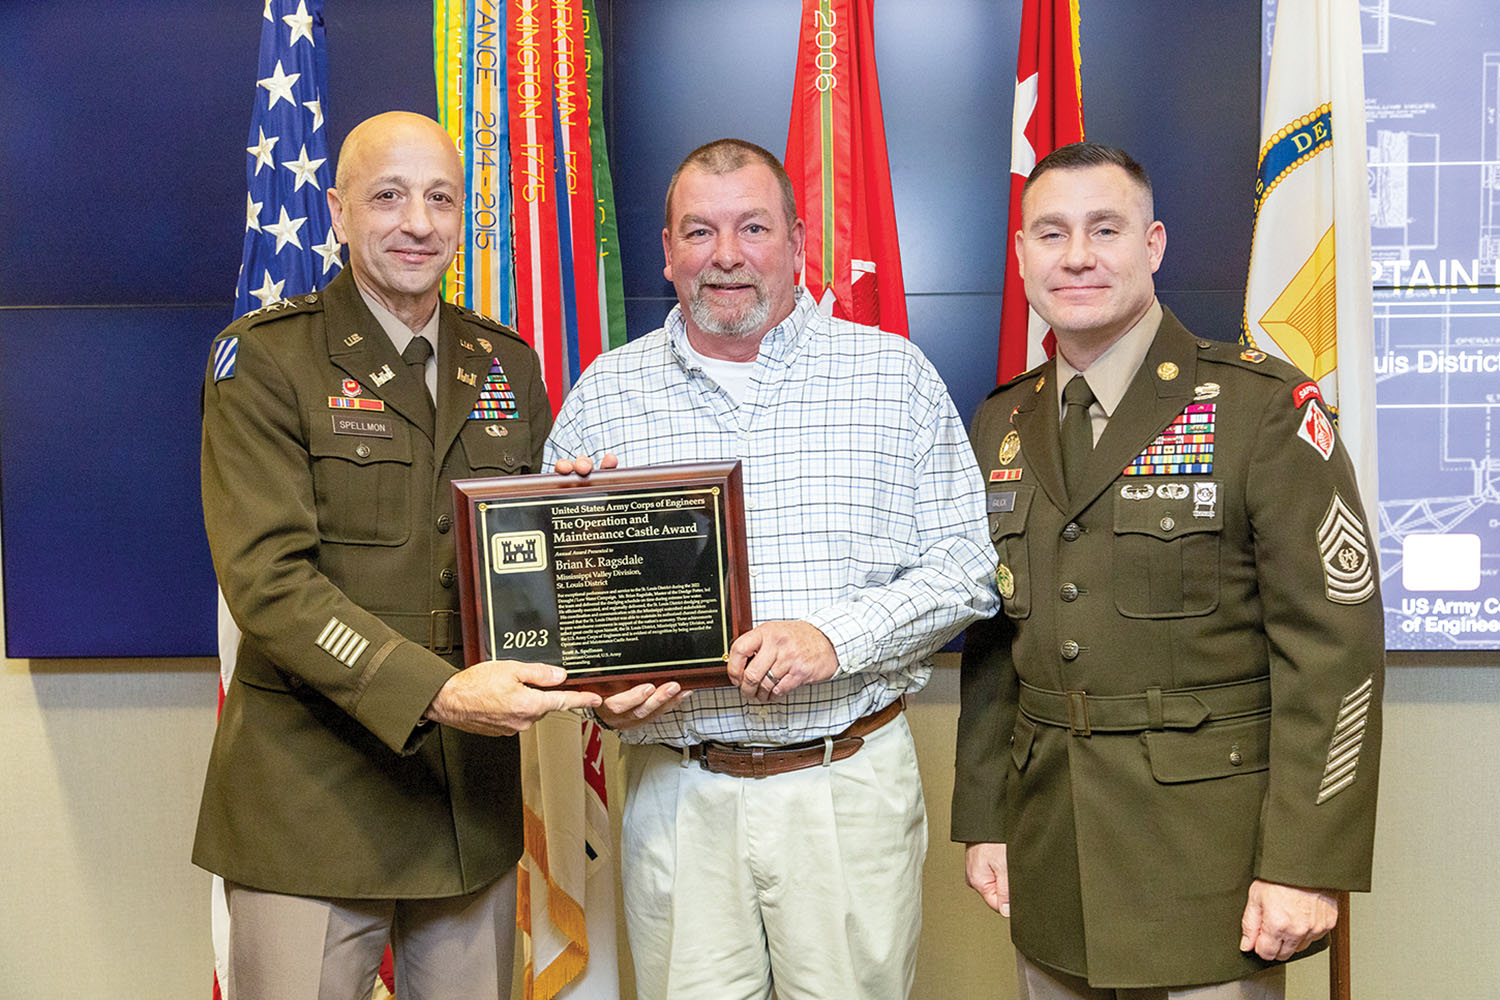 U.S. Army Corps of Engineers Chief of Engineers and Commanding General Lt. Gen Scott Spellmon presents Brian Ragsdale, St. Louis District Dredge Potter master, with the 2023 Chief of Engineers Operations and Maintenance Castle Award during the 2023 National Awards Ceremony at the Corps of Engineers headquarters in Washington, D.C., November 29. (Photo courtesy of St. Louis Engineer District)